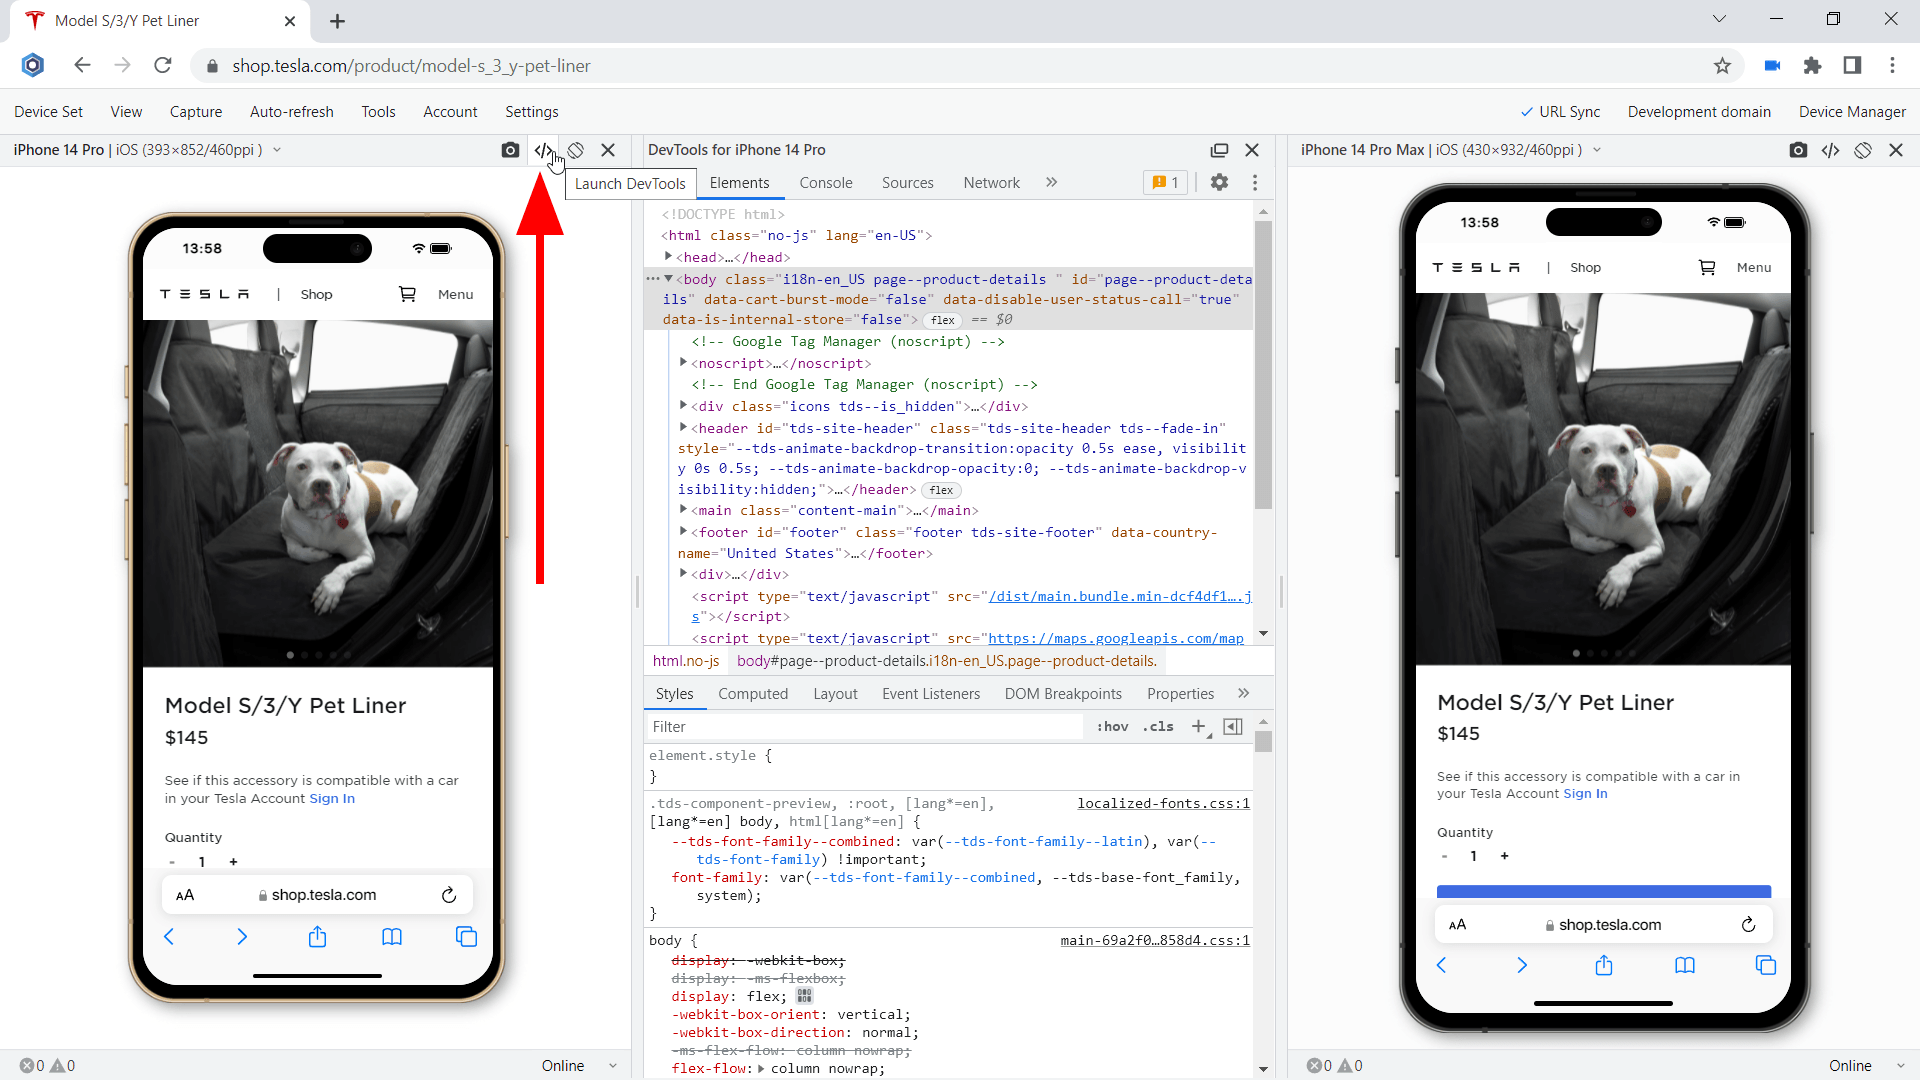 Using Developer Tools on iPhone 14-series